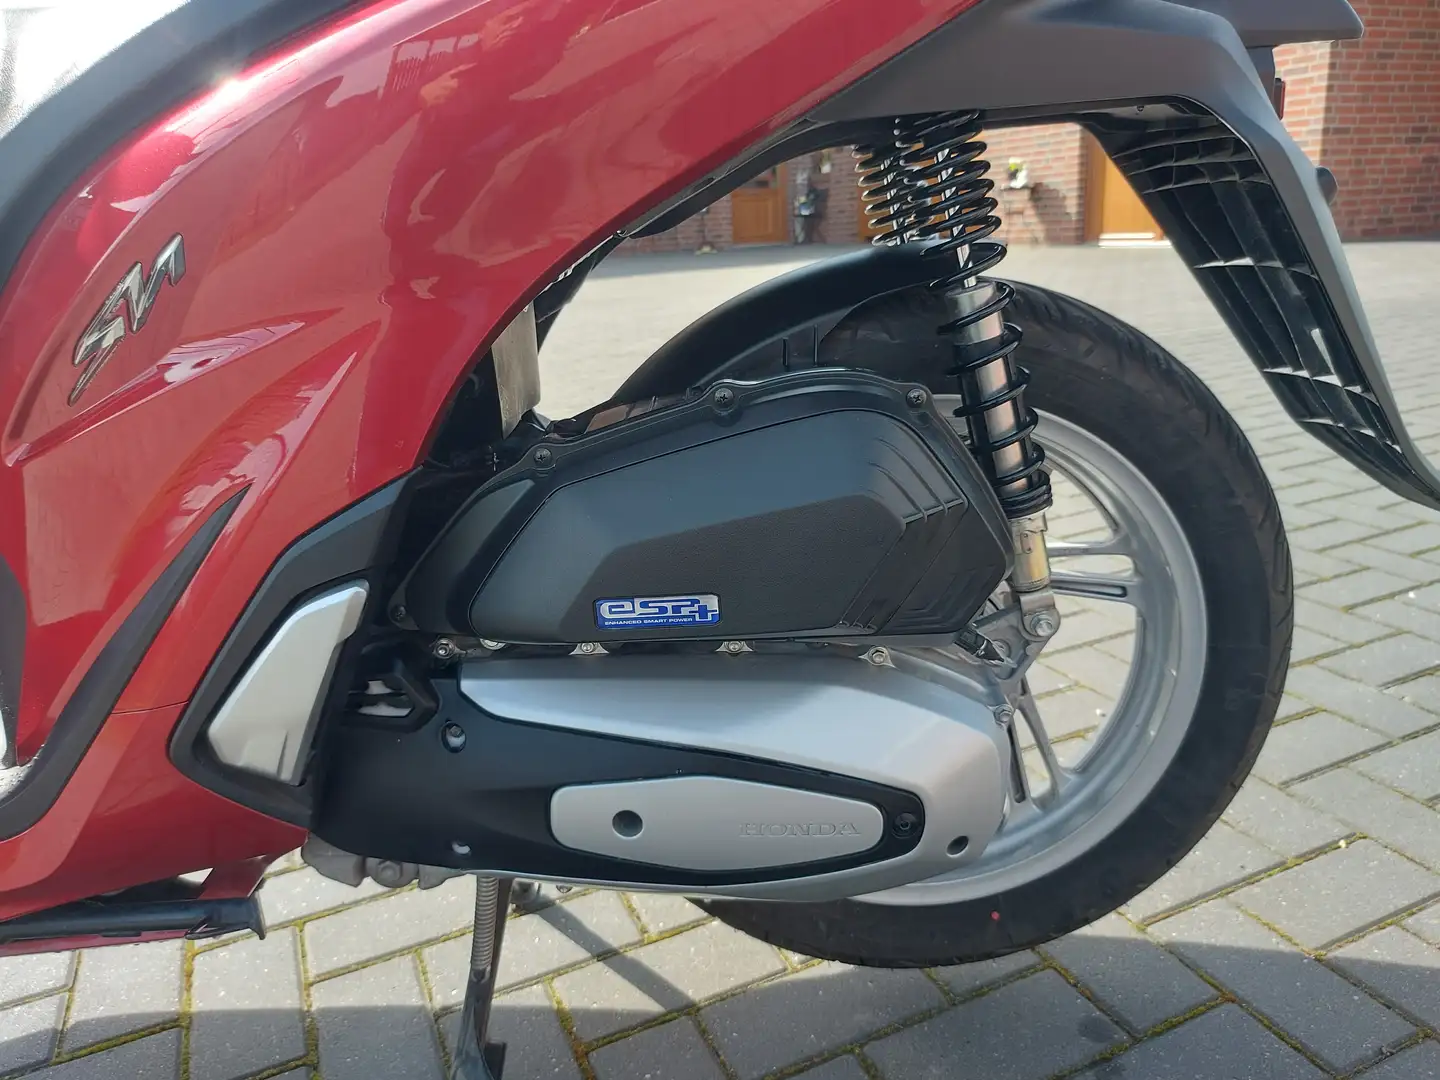 Honda SH 125i Roller/Scooter mit 125ccm, 14PS, Keyless Go, Red - 2